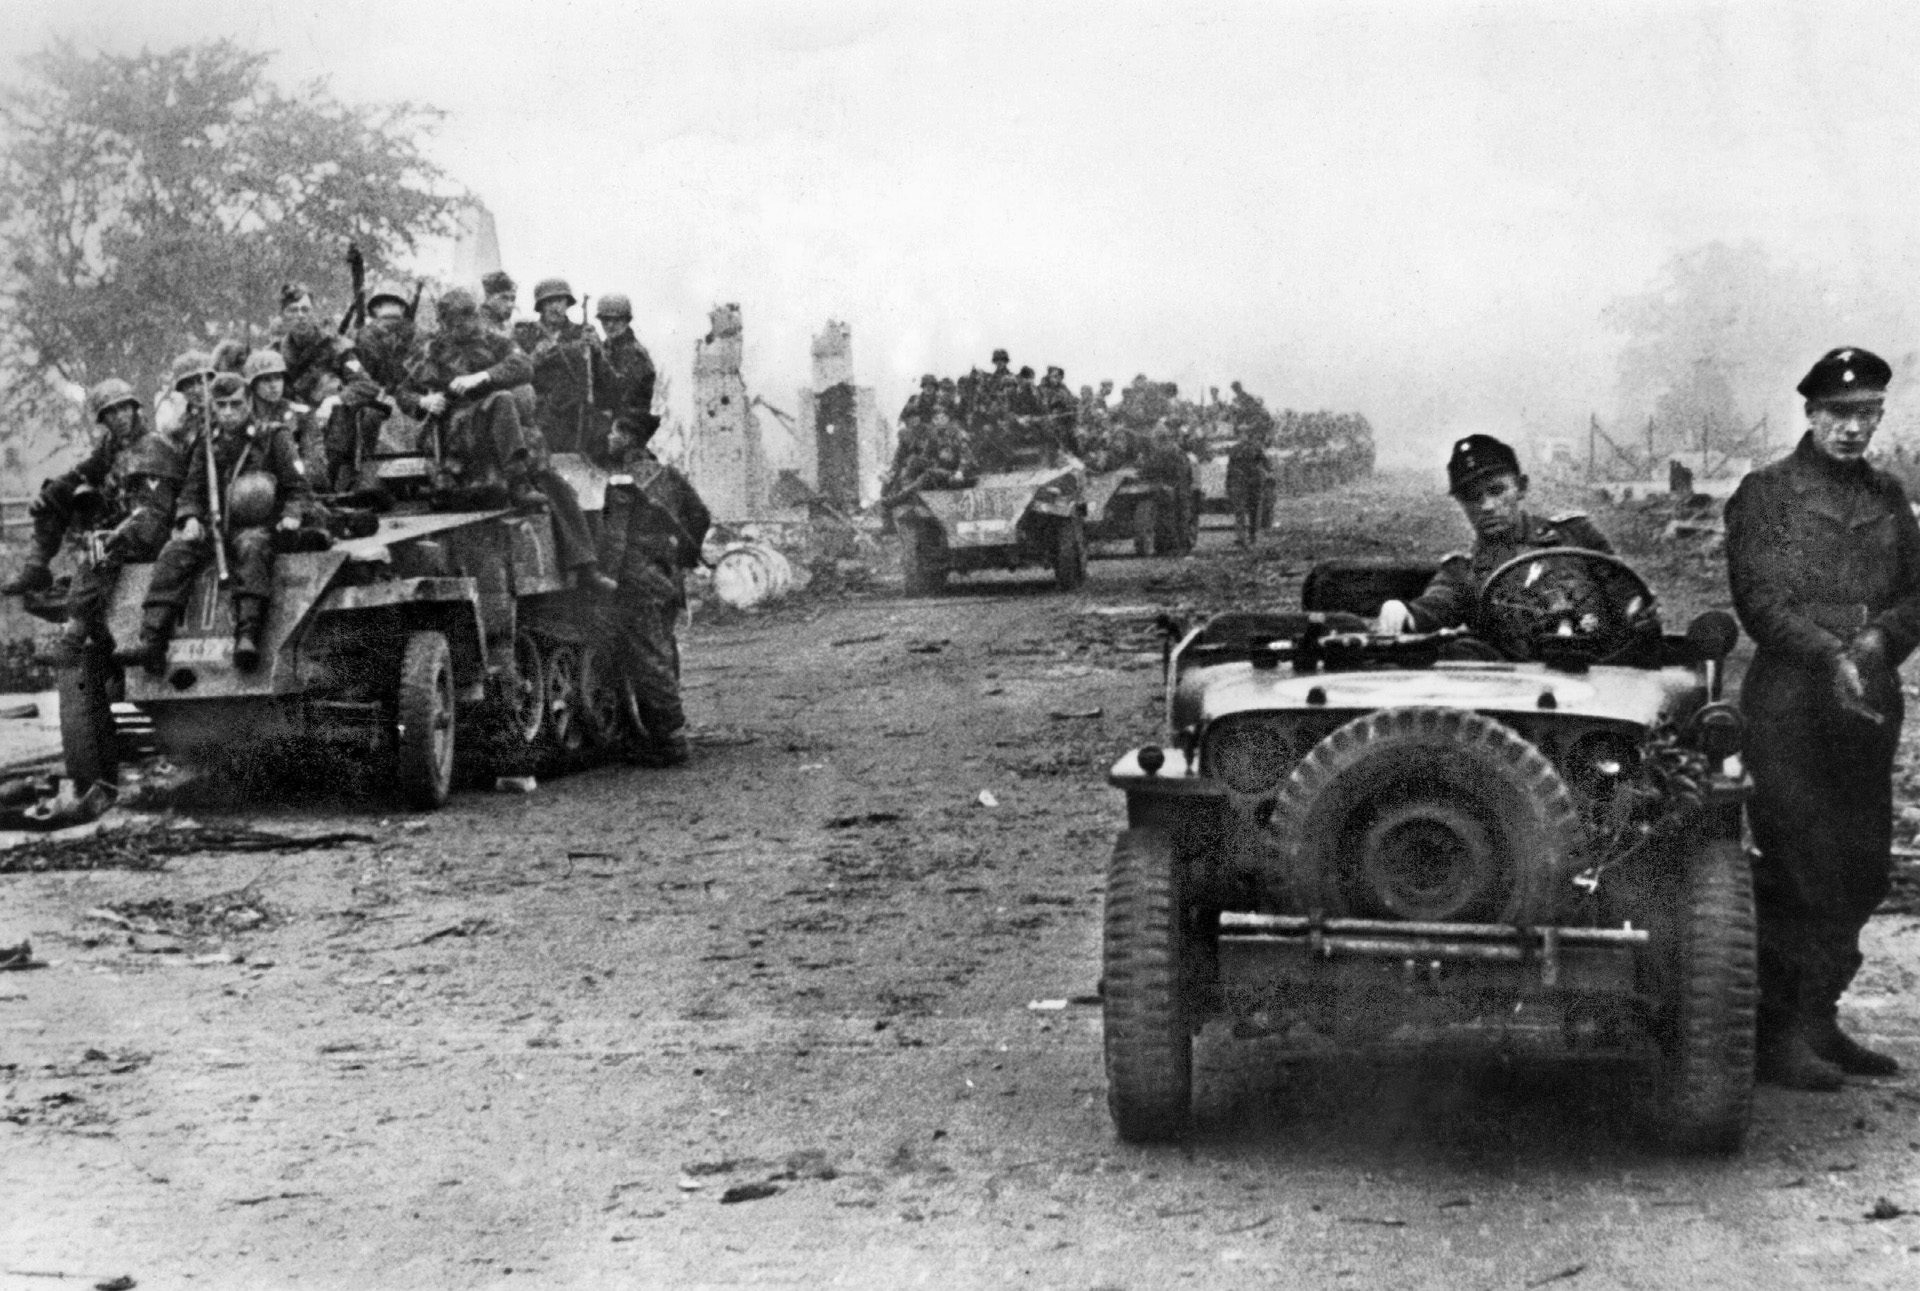 A German soldier sits at the wheel of a captured American Jeep while other troops ride atop several SdKfz. 250/1 armored cars. These heavily-armed troops rapidly regained the initiative after the early surprise of Allied airborne landings in the Netherlands and brought Operation Market-Garden to a halt.